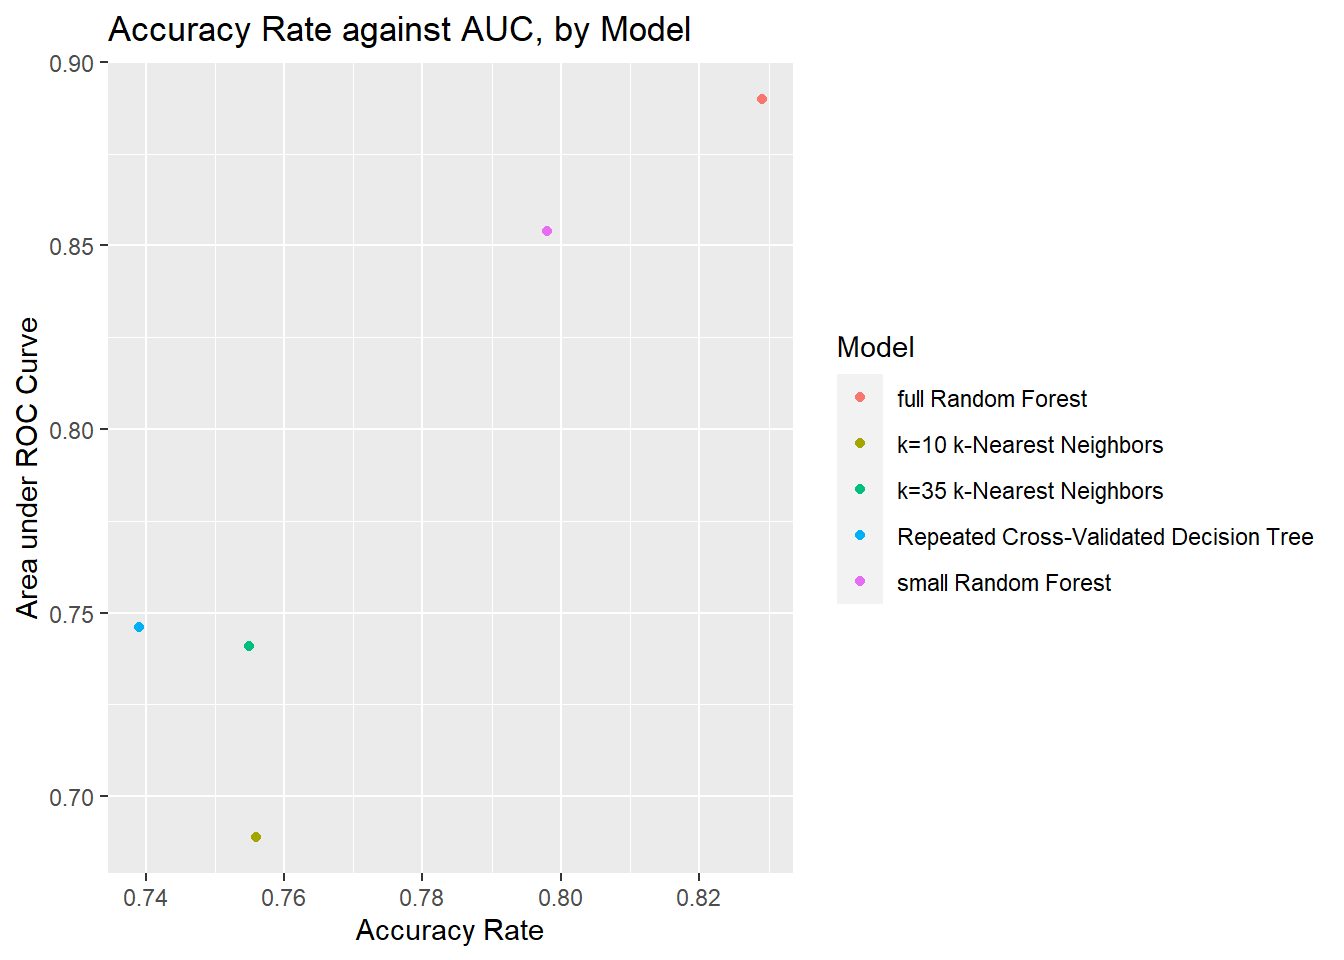 Scatterplot comparing AUC and Accuracy Rate of all models.